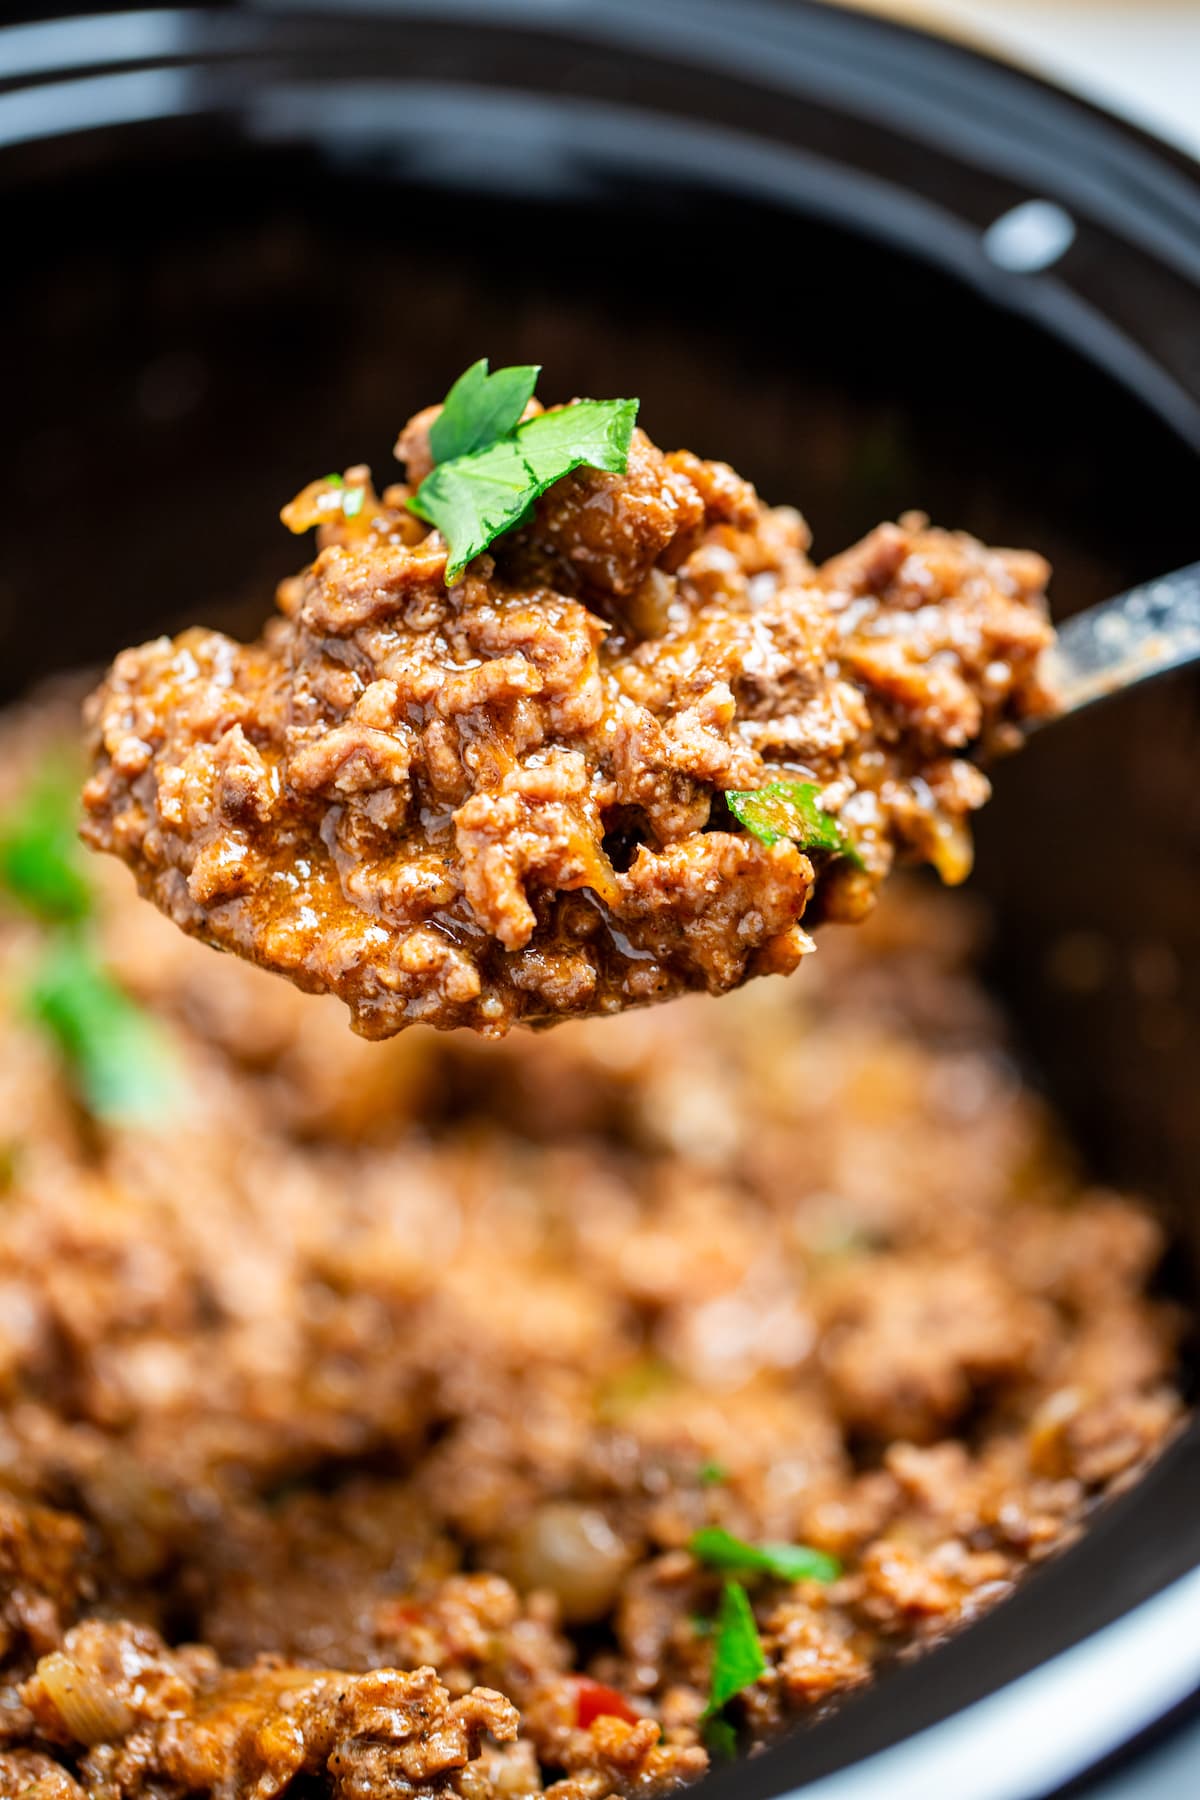 Slow cooker full of slow cooker taco meat topped with fresh parsley, with a spoon scooping meat up.